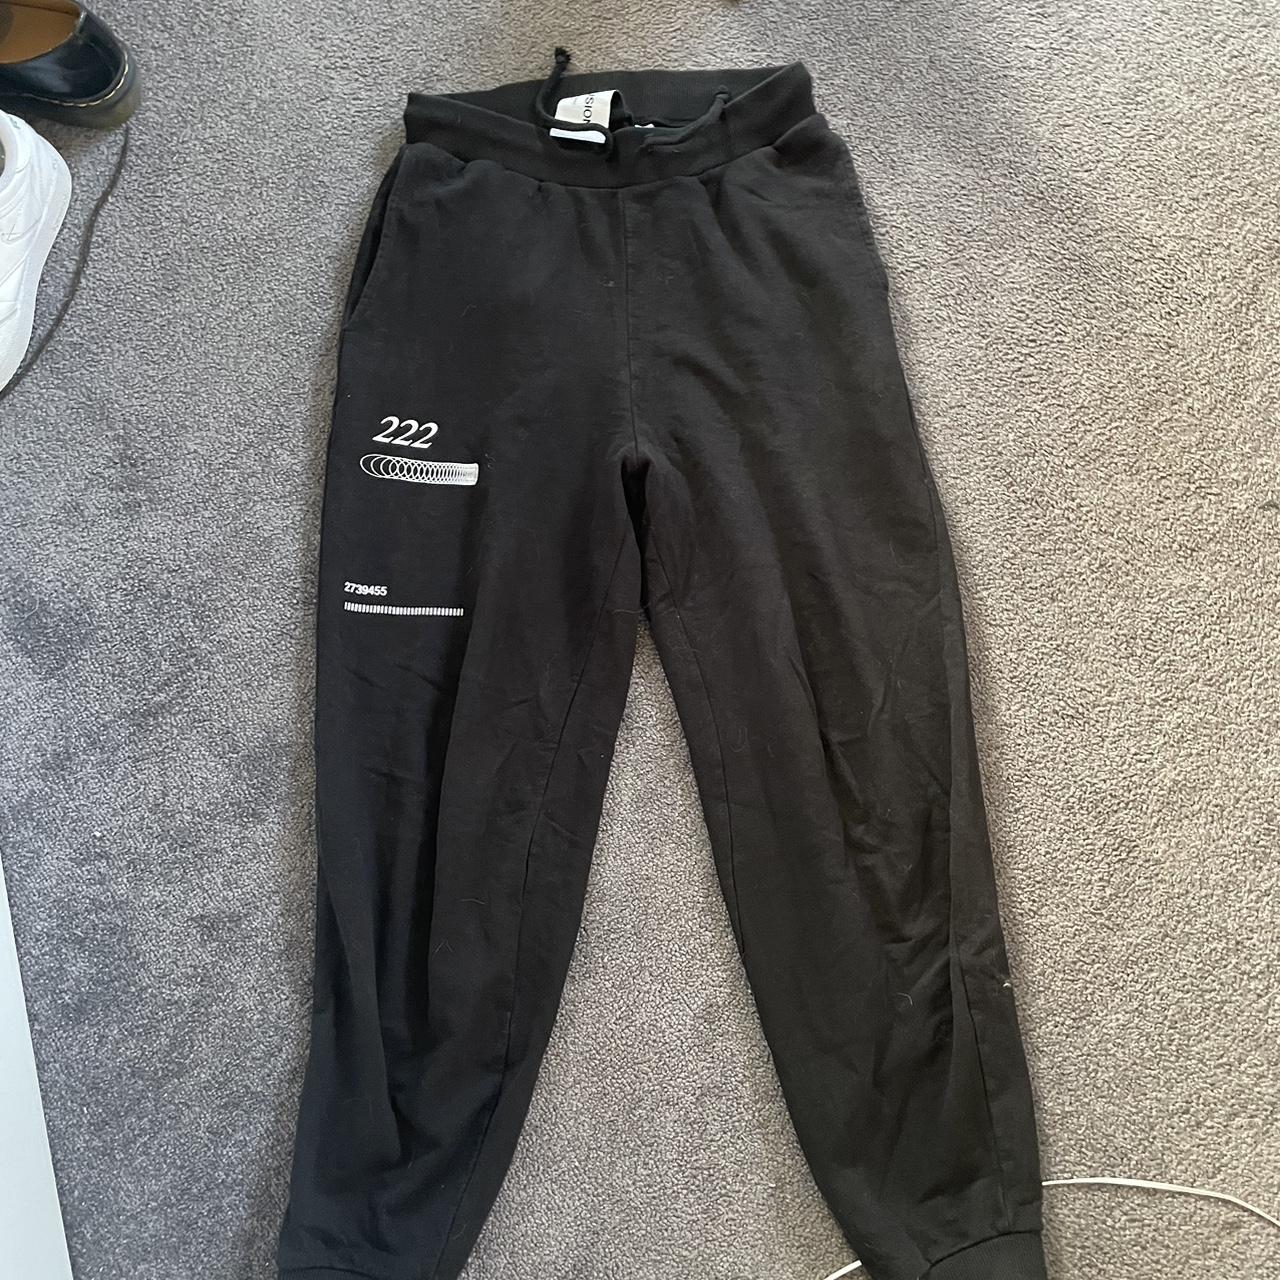 Baggy collusion track pants - rlly comfy - Size s -... - Depop